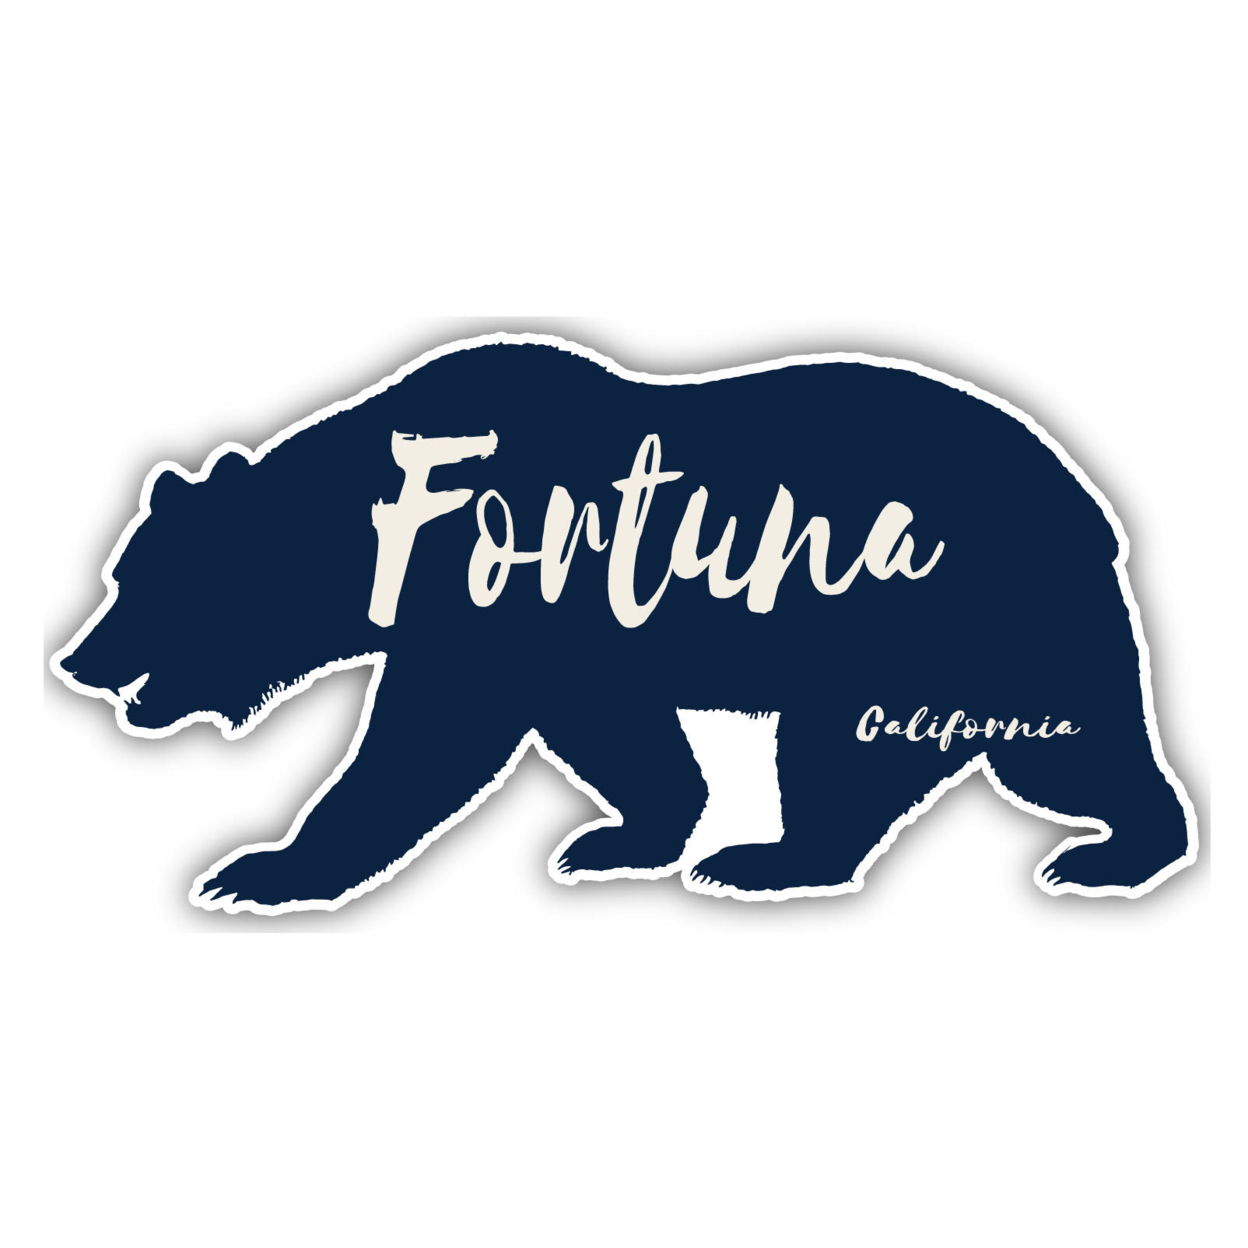 Fortuna California Souvenir Decorative Stickers (Choose Theme And Size) - 4-Pack, 6-Inch, Tent